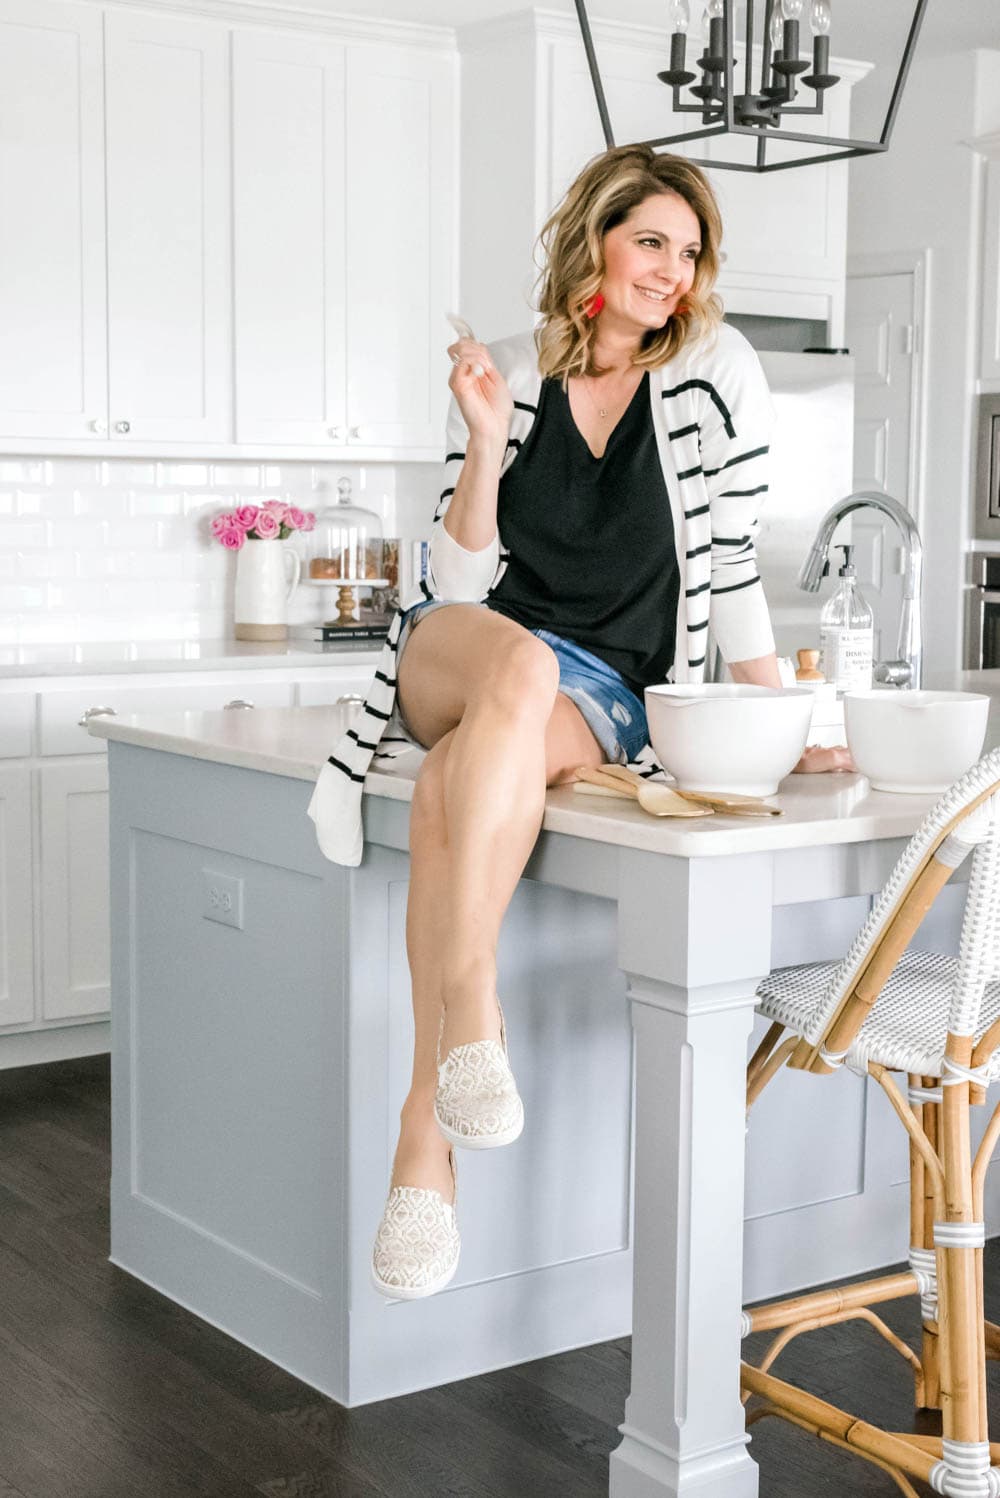 Bouncing into spring with Zappos and Clarks with comfort and style! #ad #ClarksforLife #Comfort #Comfortinyoursoul #ZapposStyle